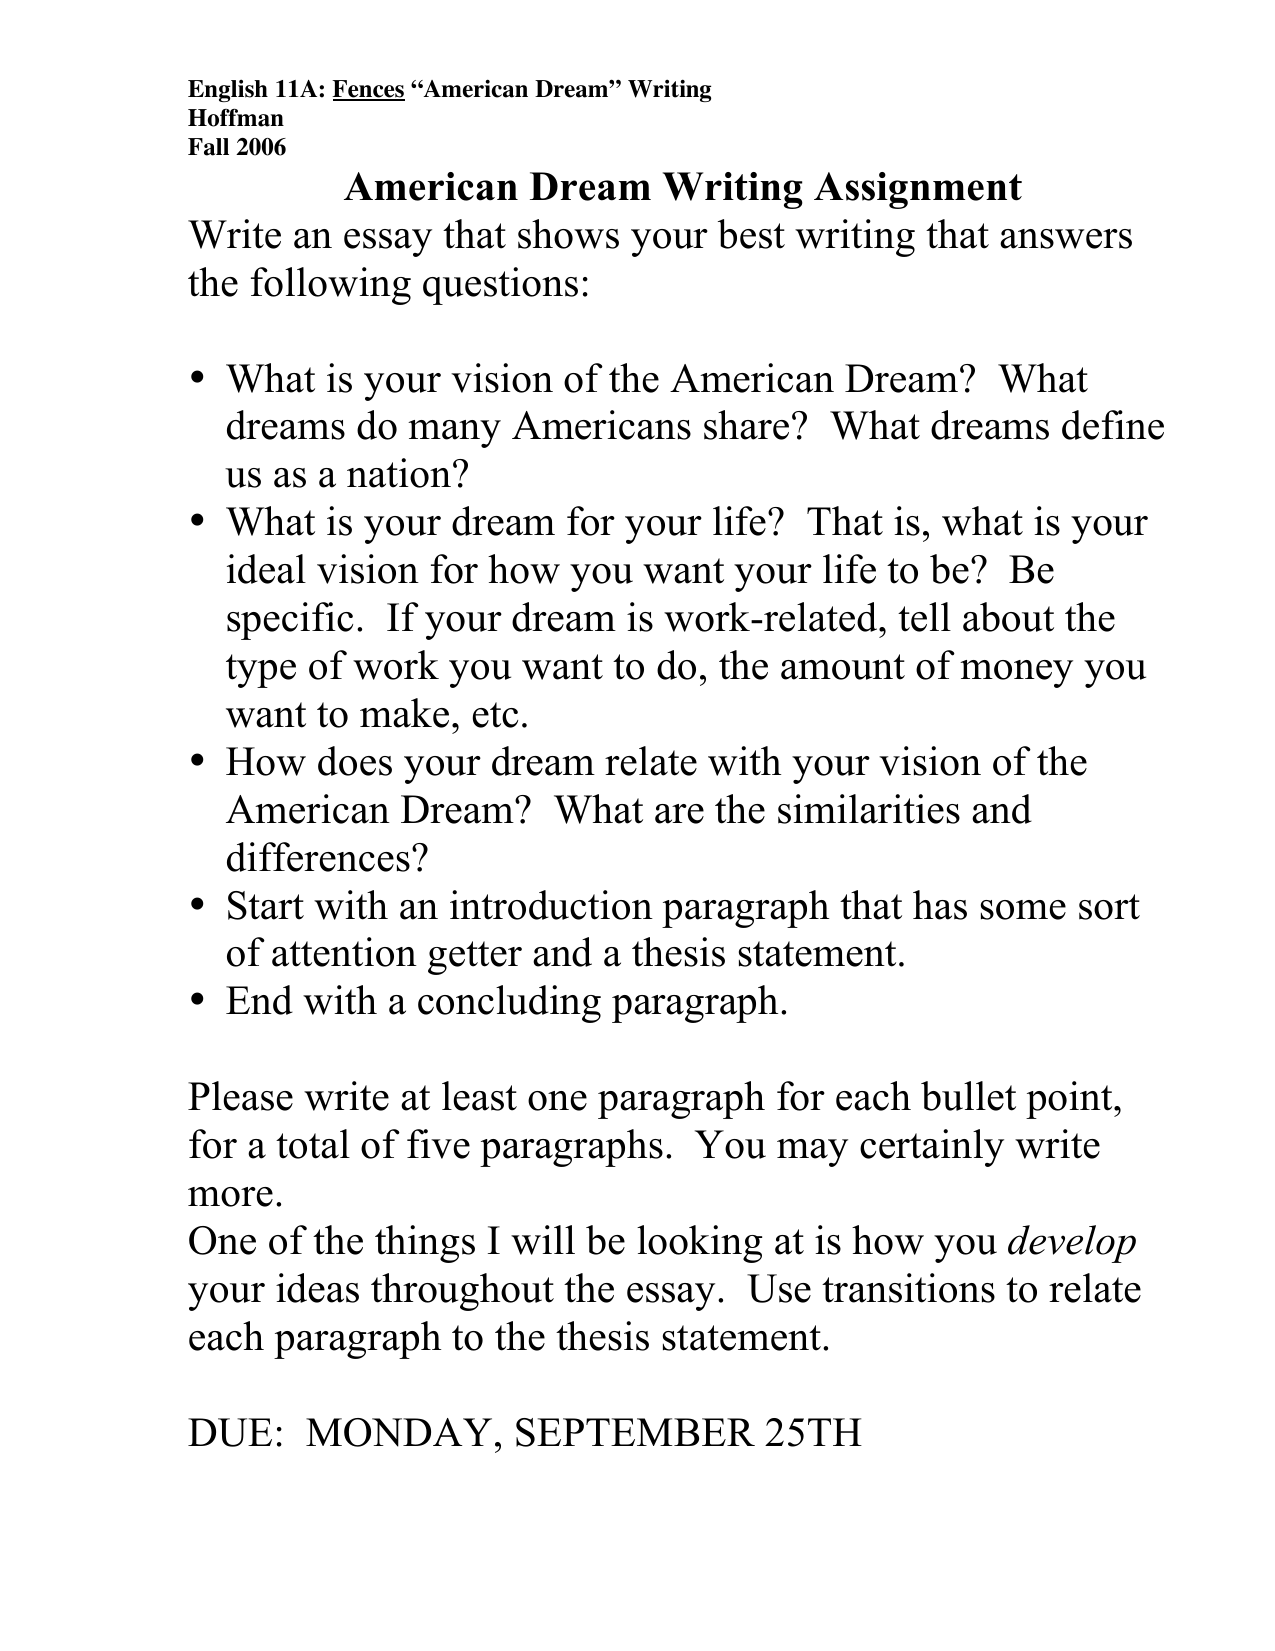 An essay about dreams